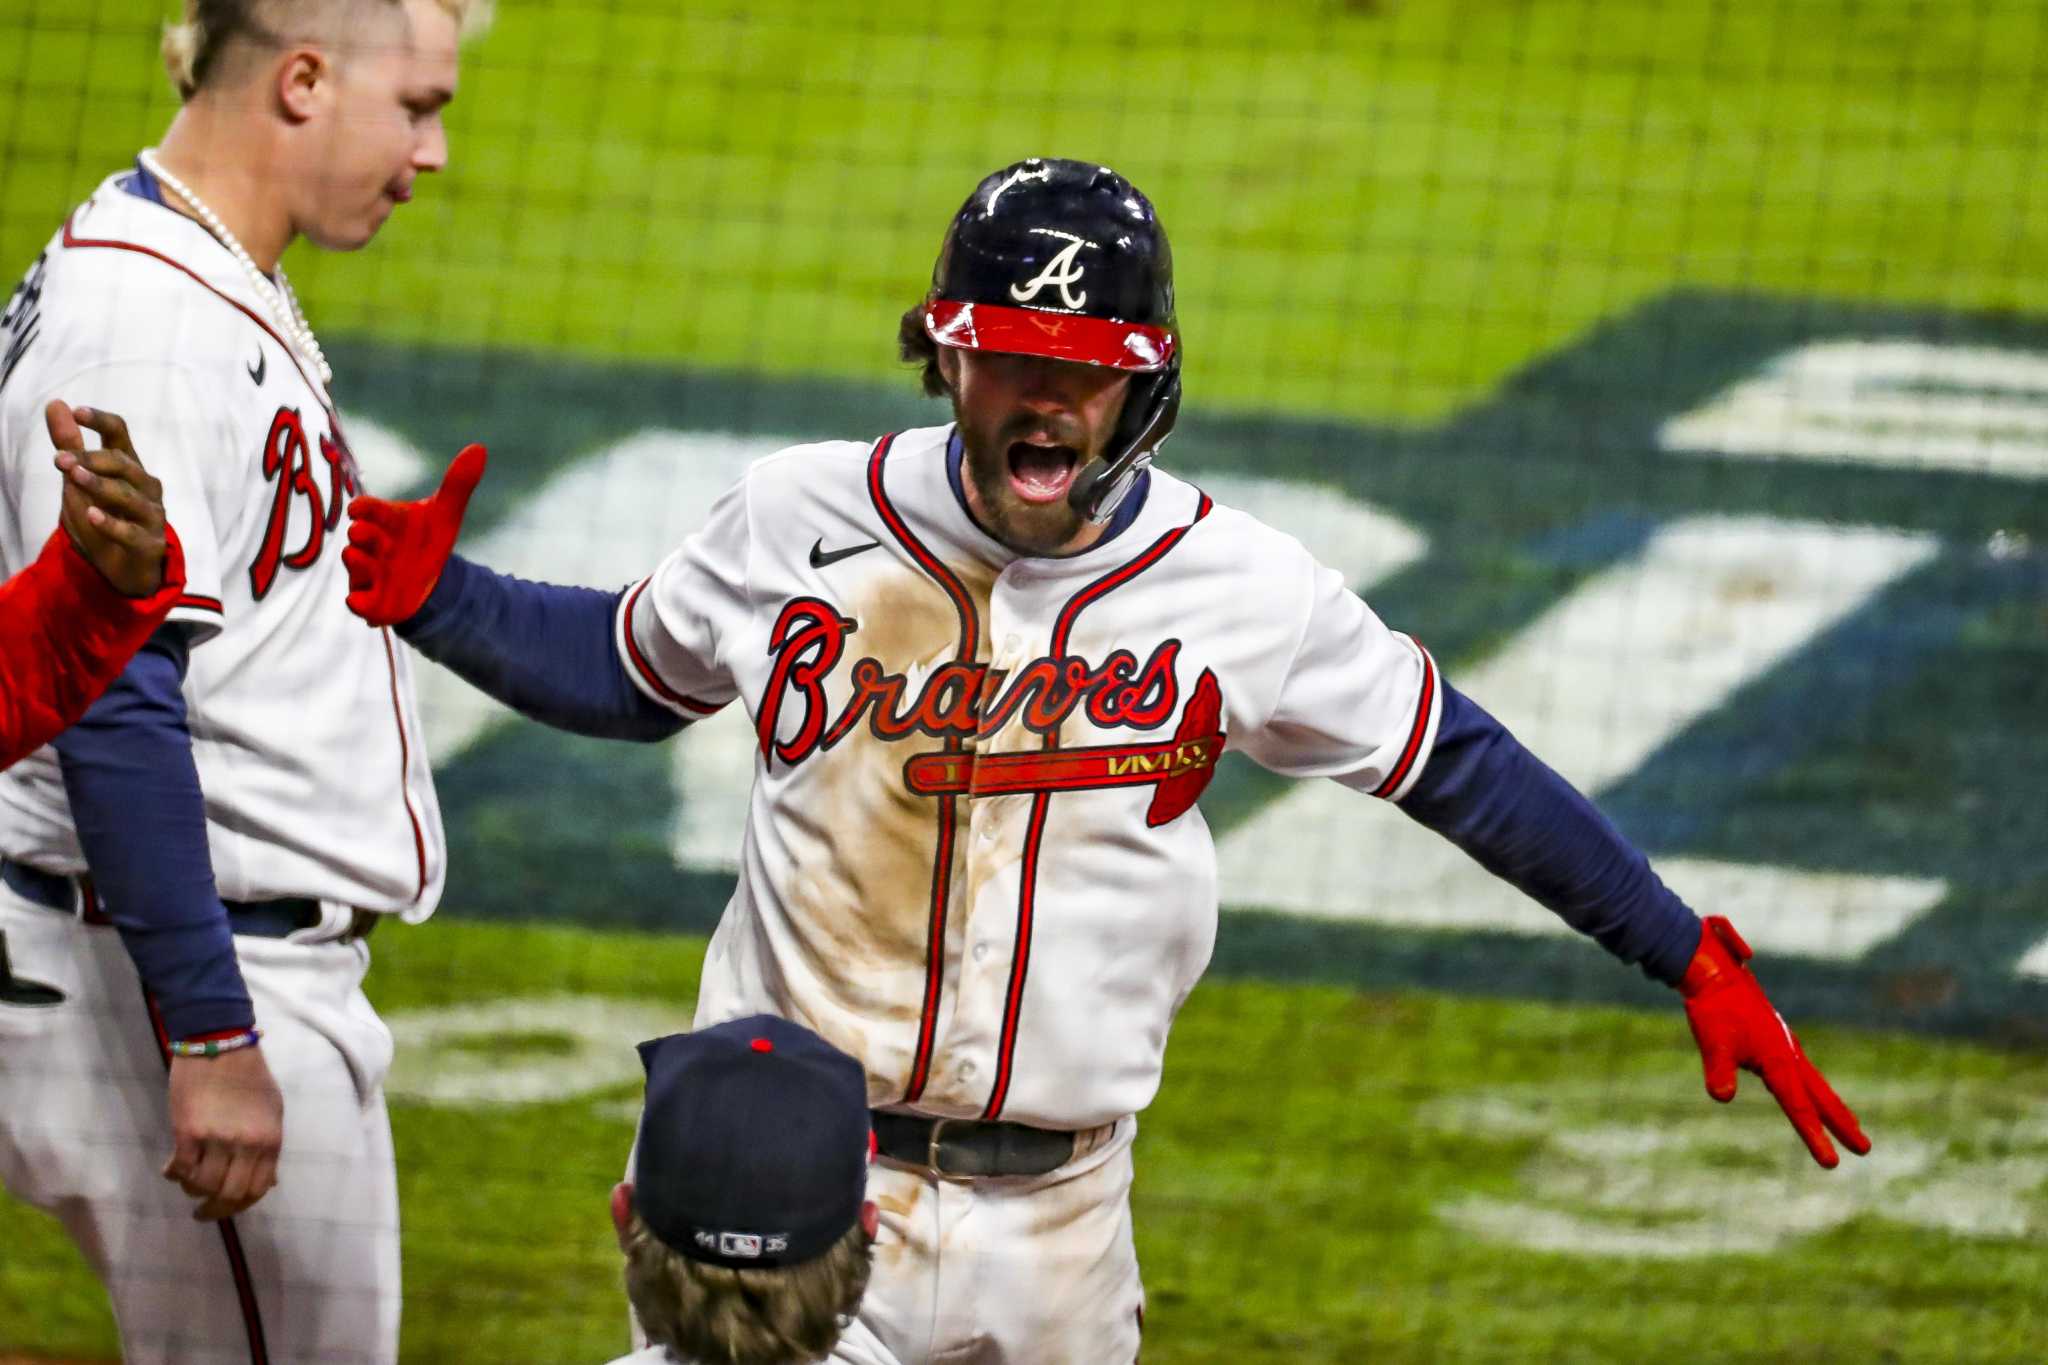 A light-hitting shortstop and a reserve outfielder deliver 1-2 punch for  Braves